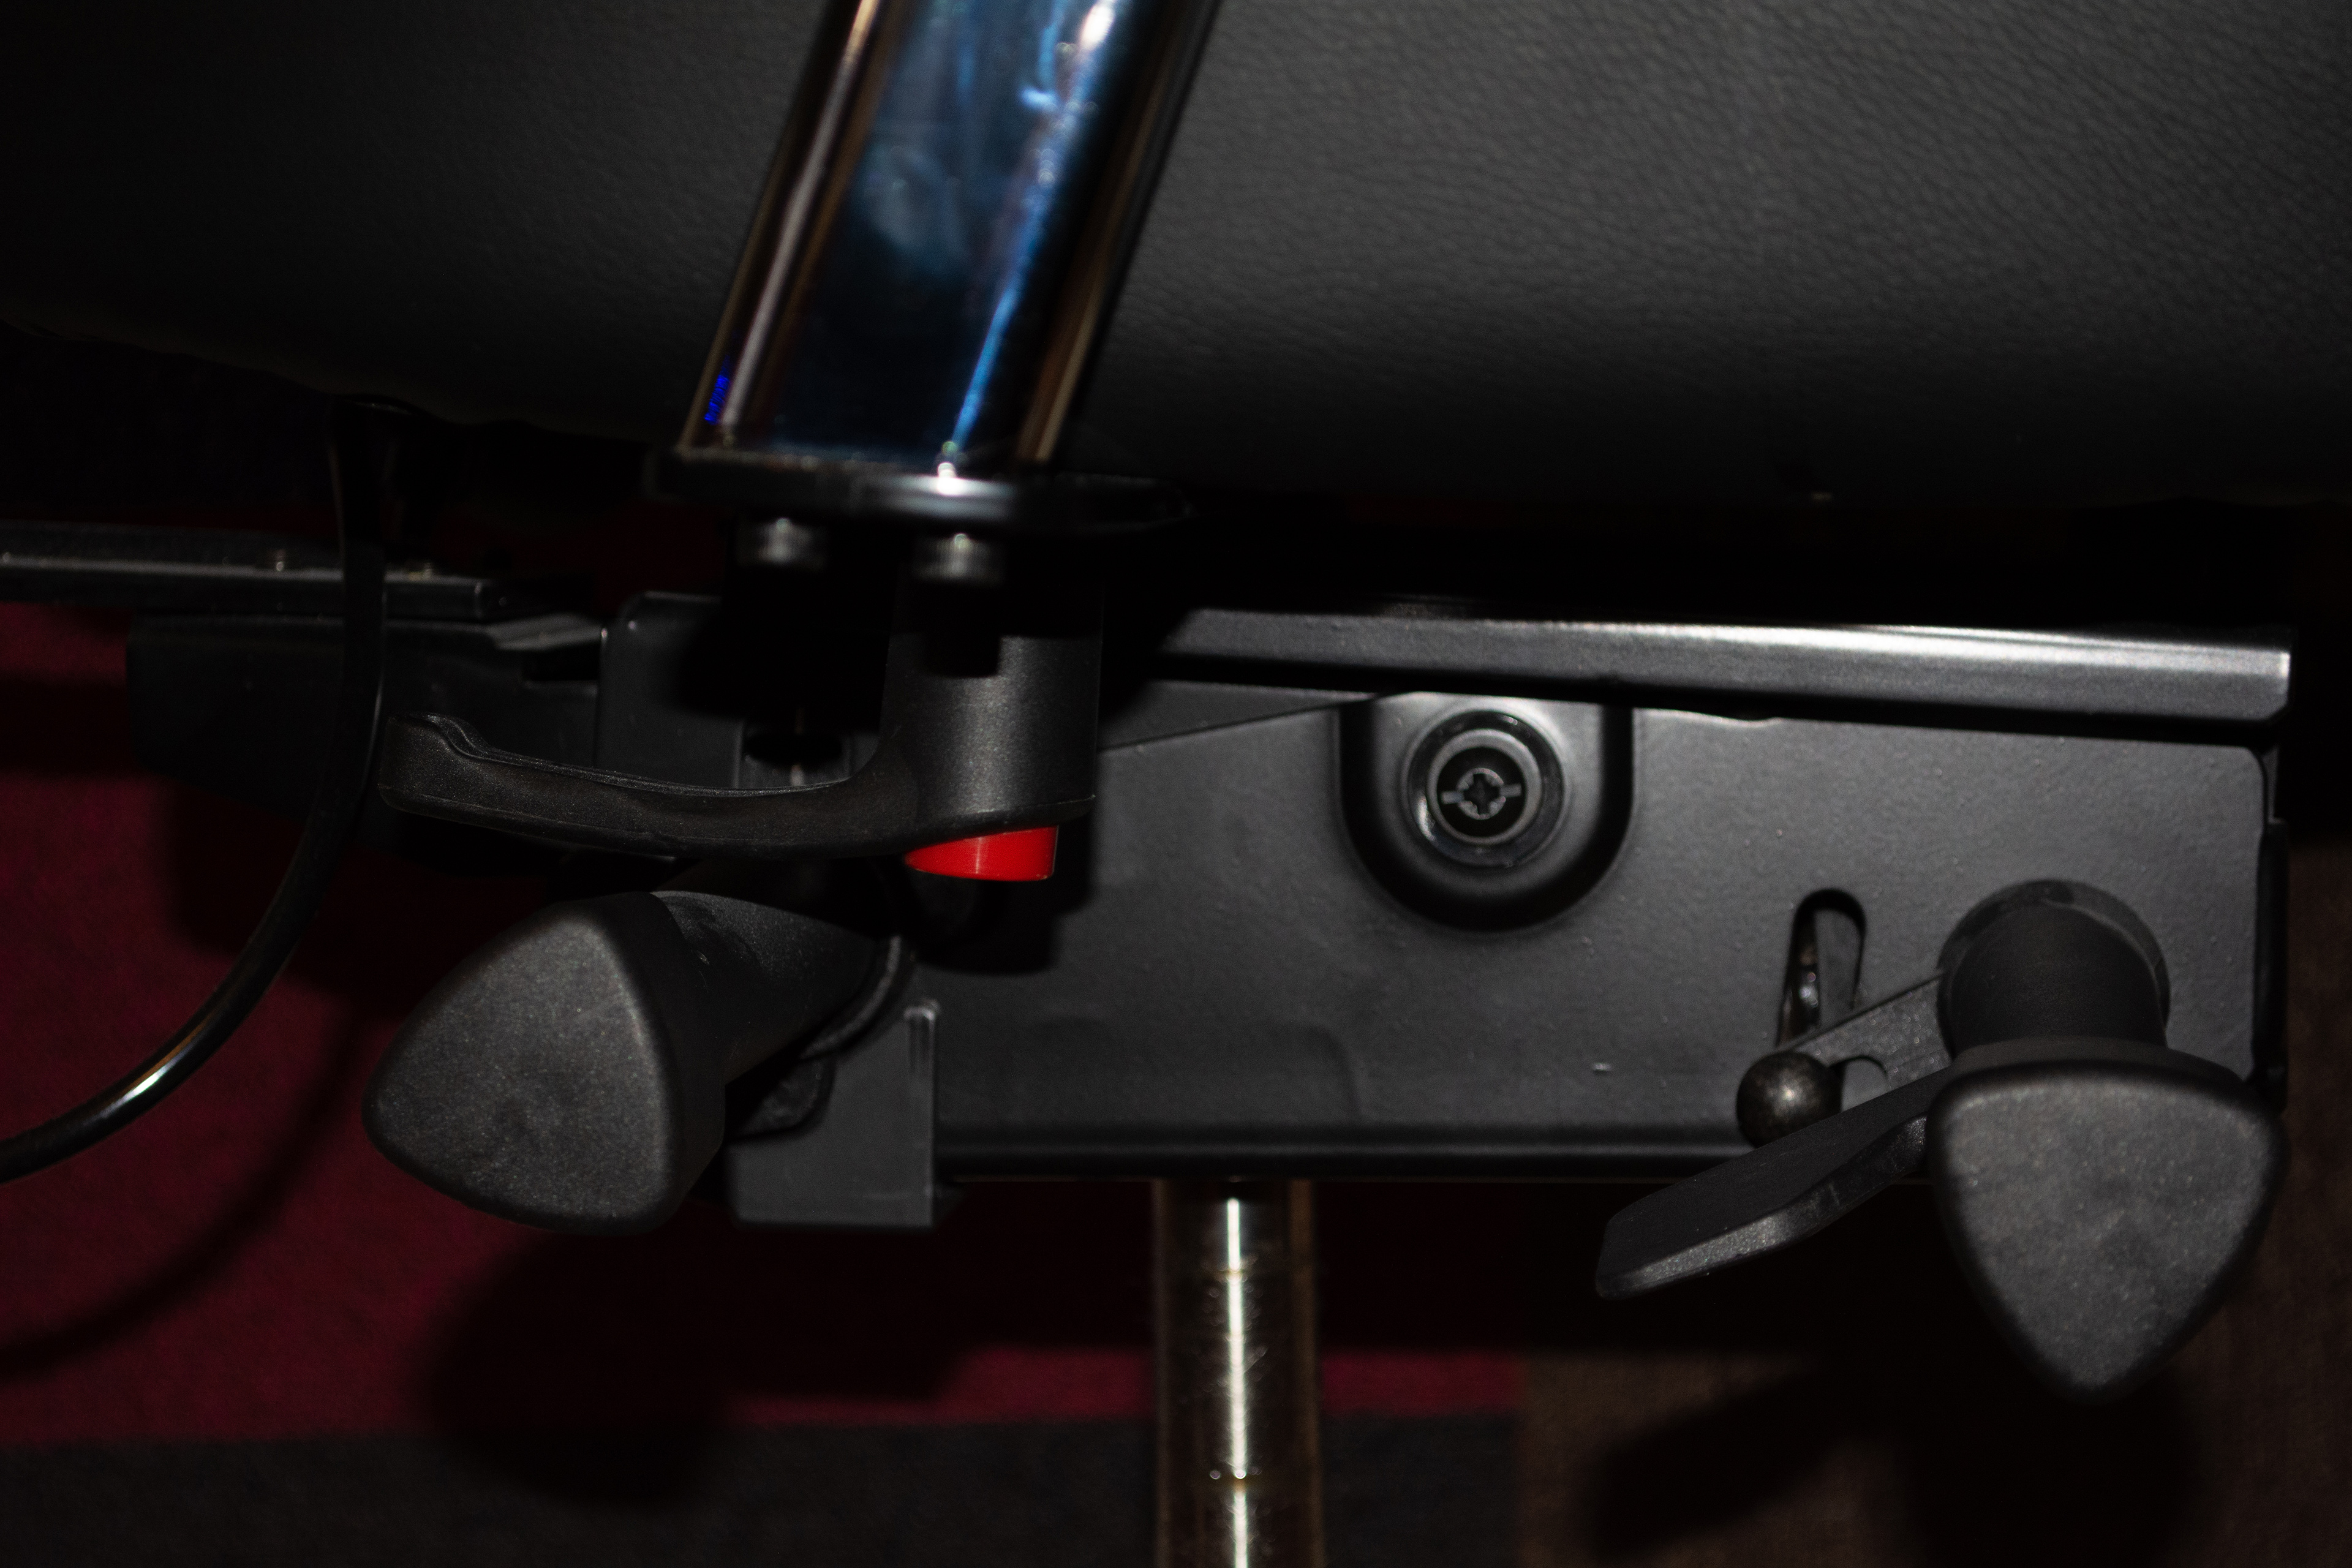 Big red shiny button on the EDGE GX1 gaming chair